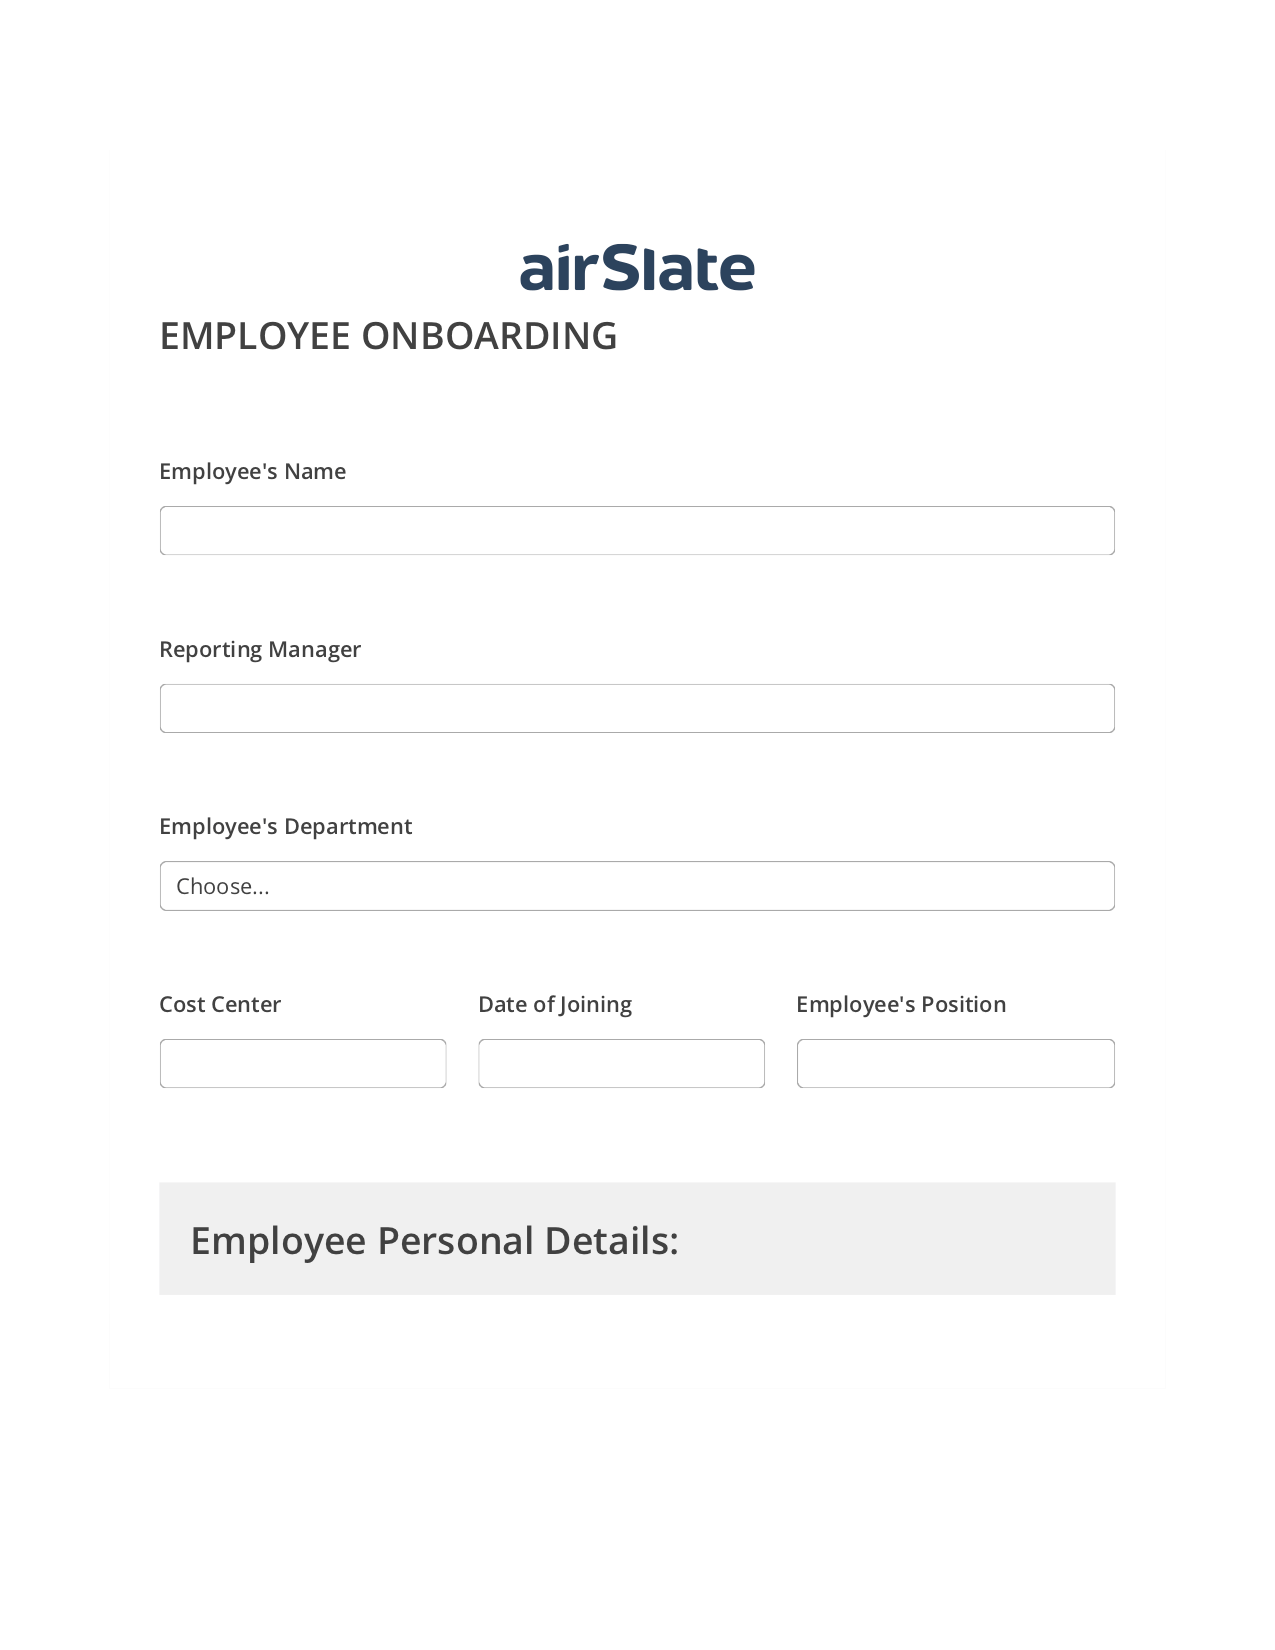 Employee Onboarding Workflow Pre-fill from Salesforce Records with SOQL Bot, Custom Field's Value Bot, Export to Excel 365 Bot